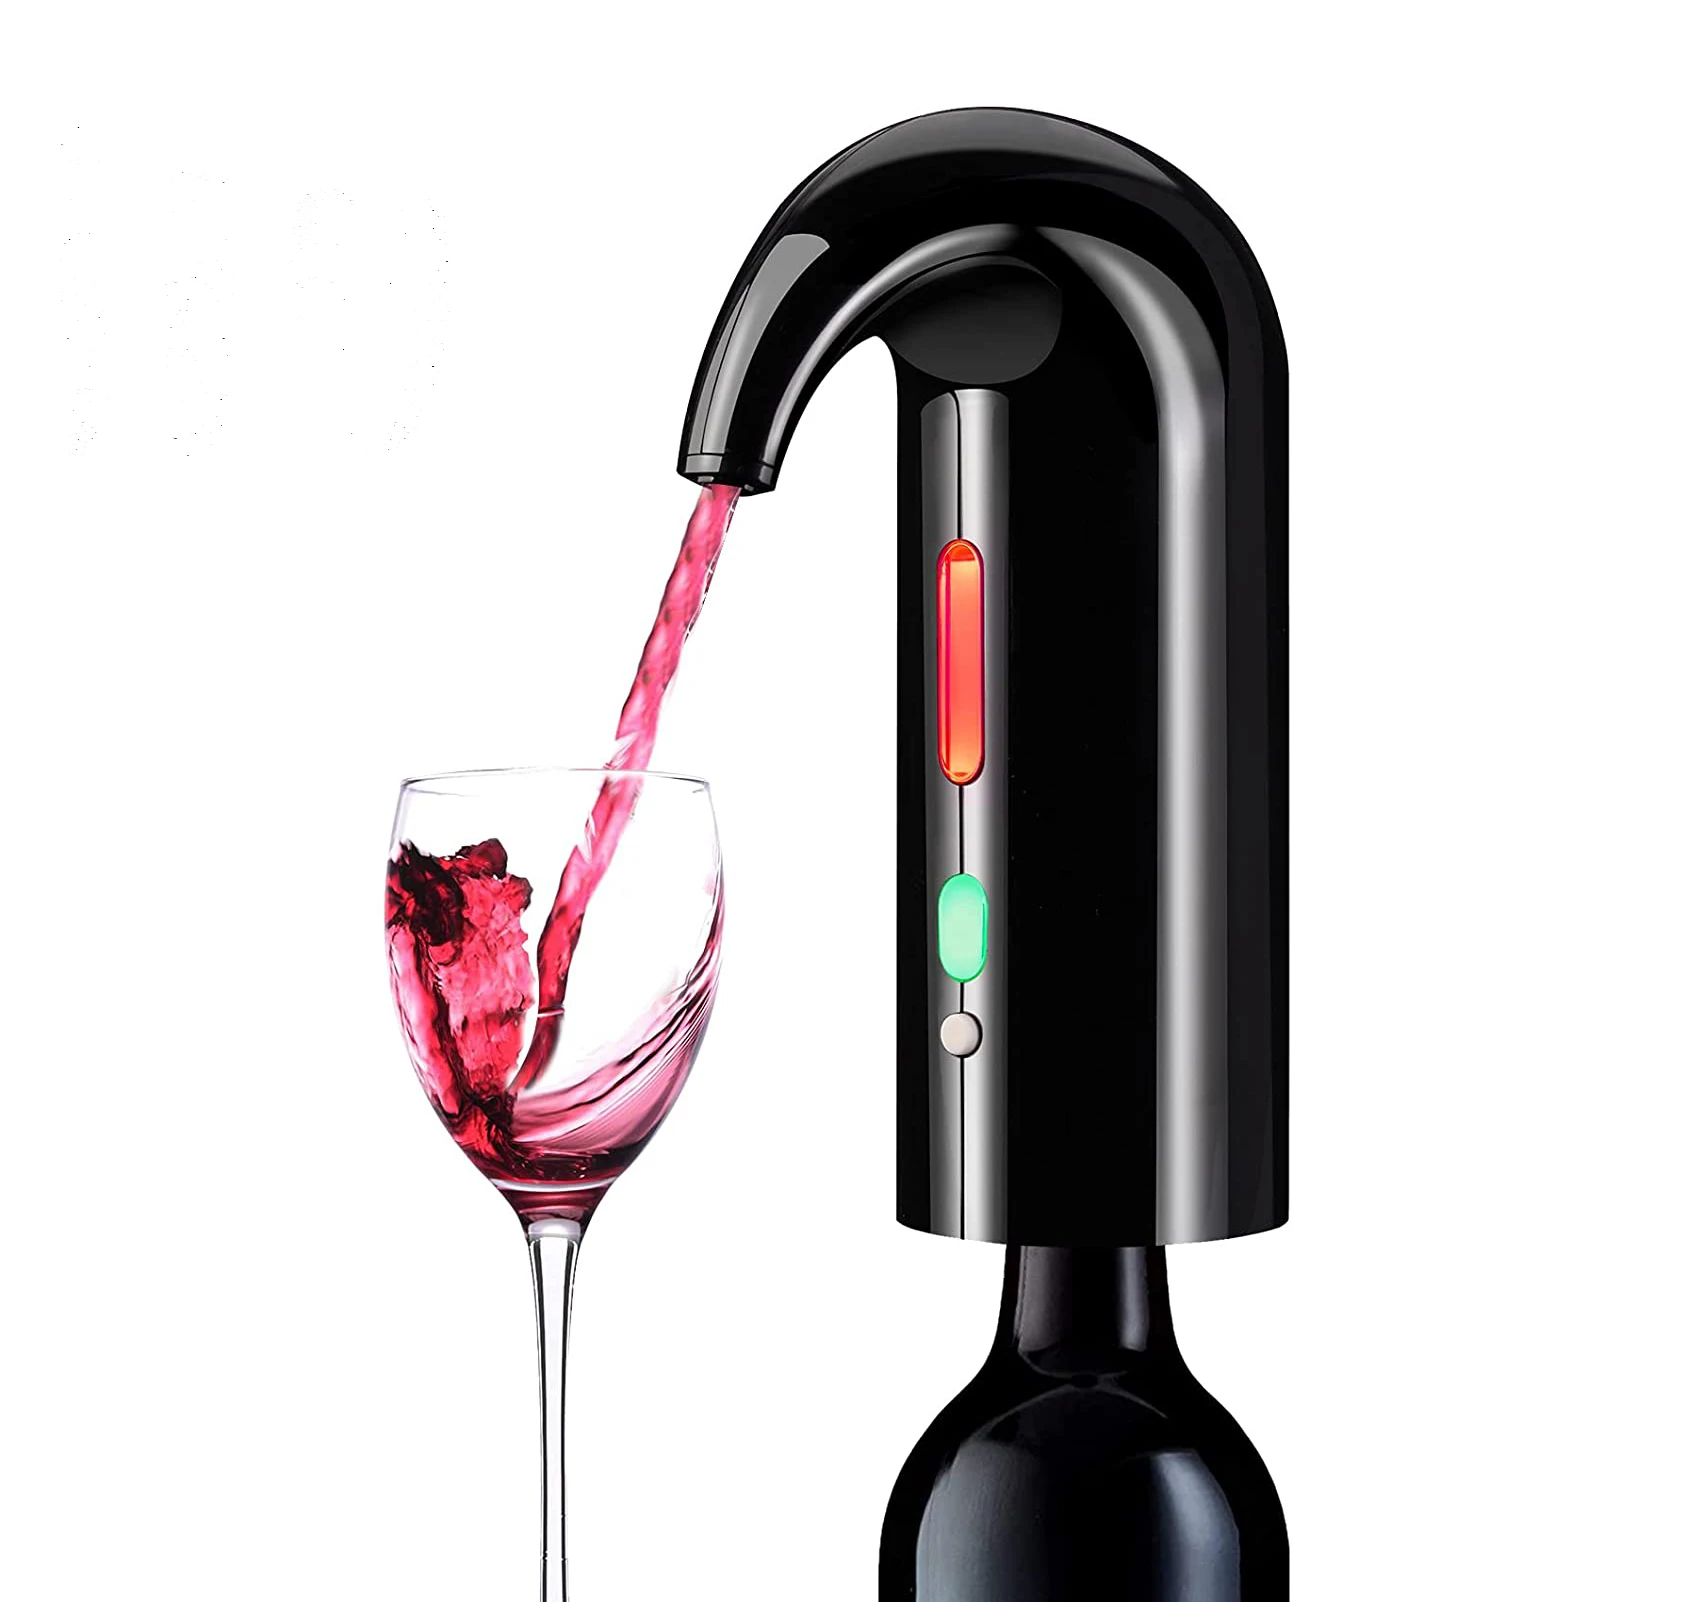 

Electric Wine Aerator and Dispenser Pump Battery Powered Automatic Wine Aerator Pourer Spout One-button Smart Wine Decanter, Red, black, white